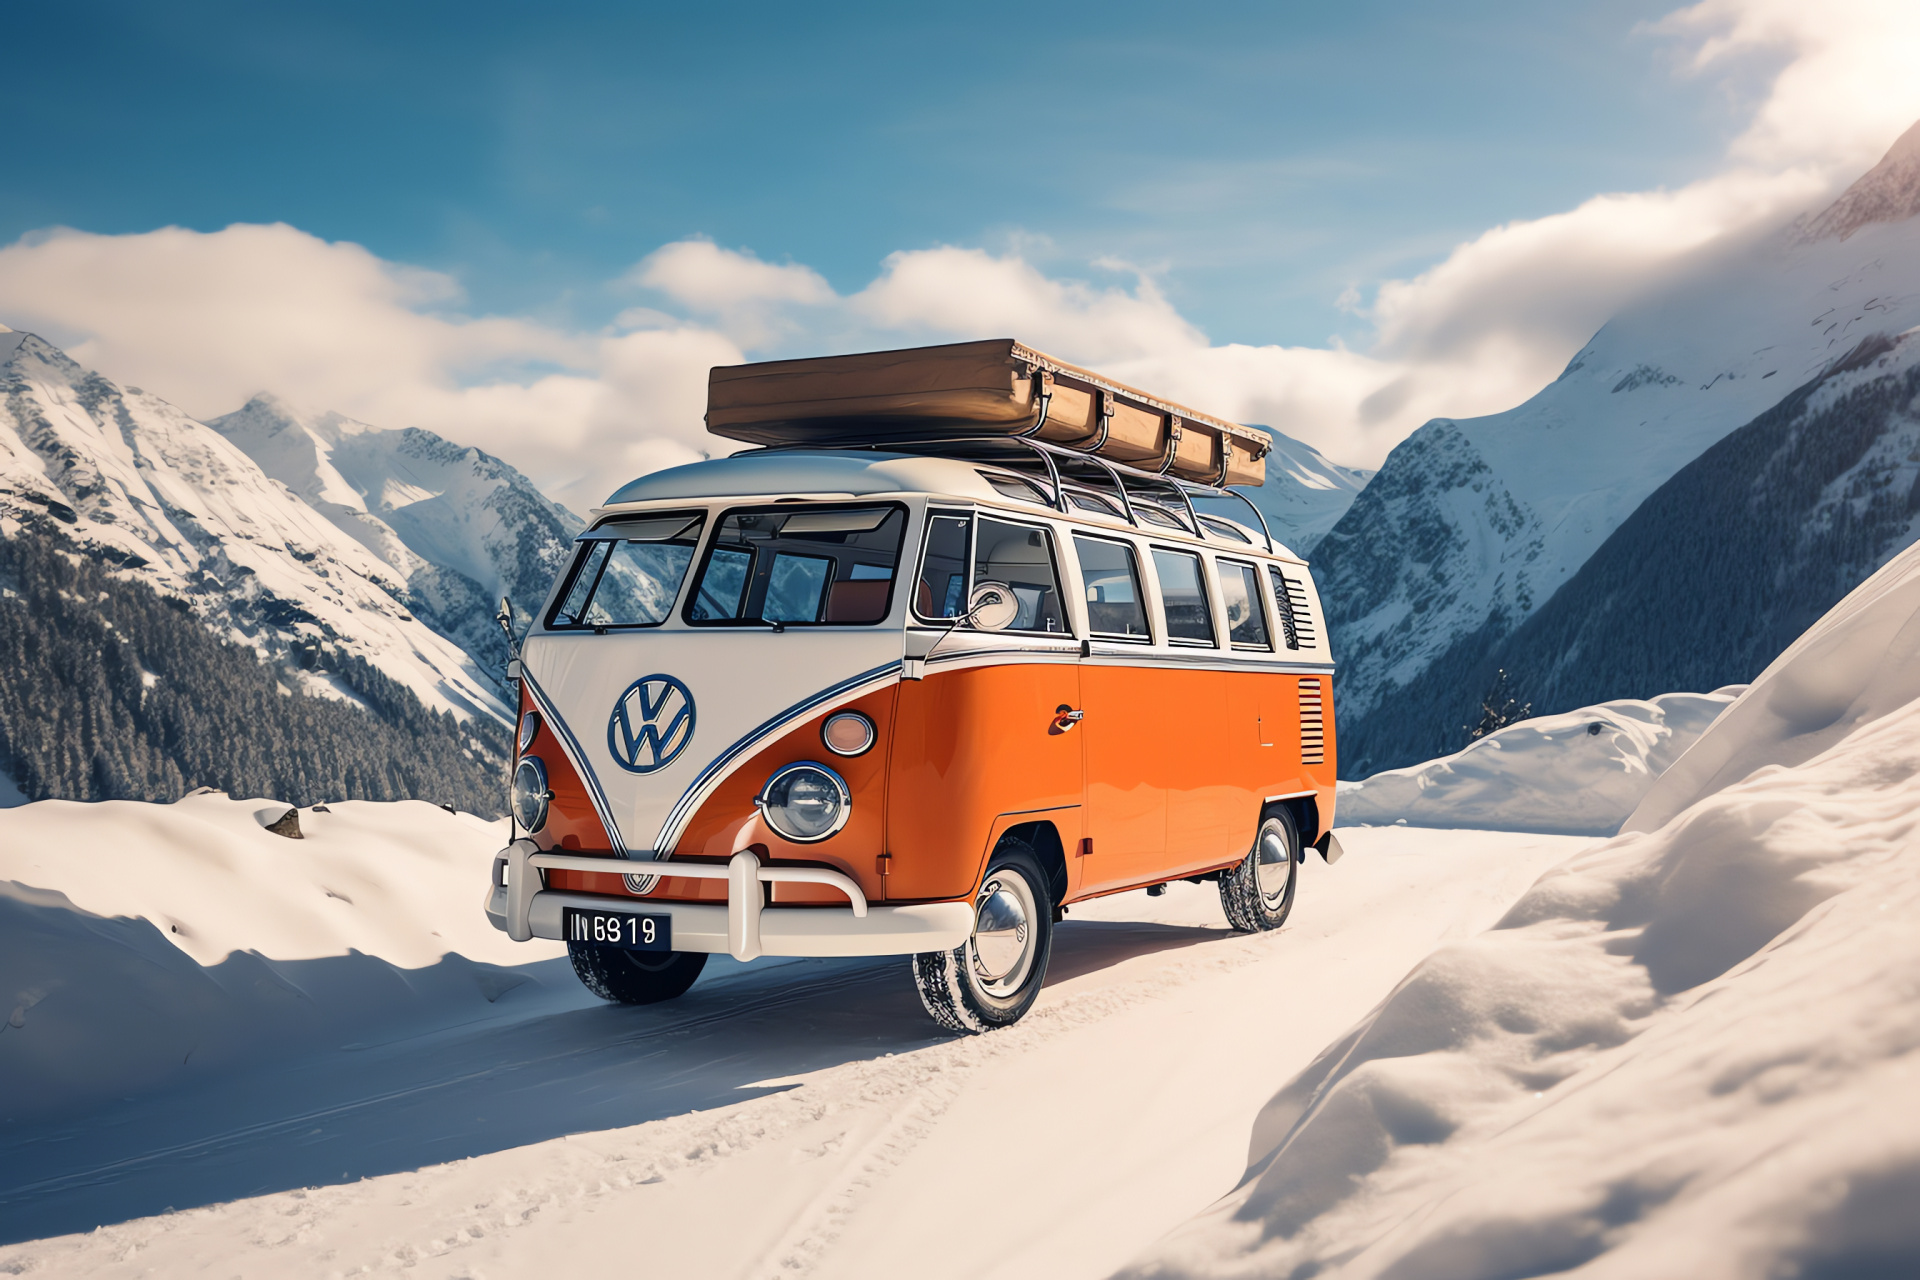 VW Bus in Swiss Alps, winter equipment, chilled alpine environment, high-altitude journey, rustic accommodation warmth, HD Desktop Image